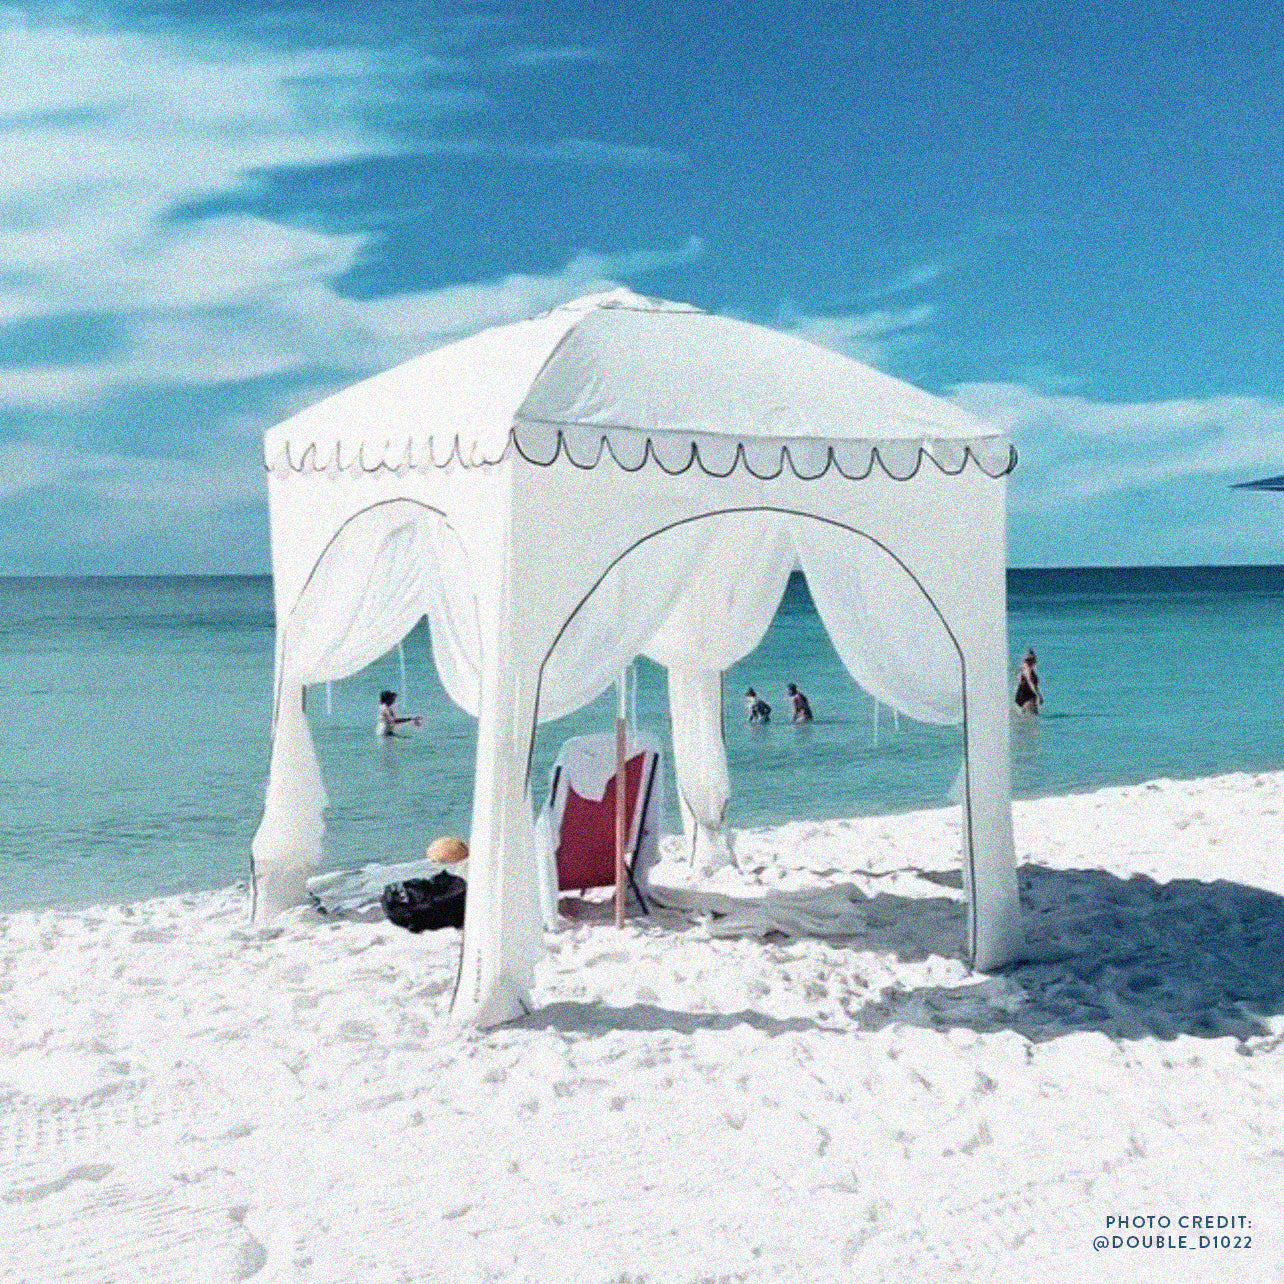 the ARCHED CABANA in Cream